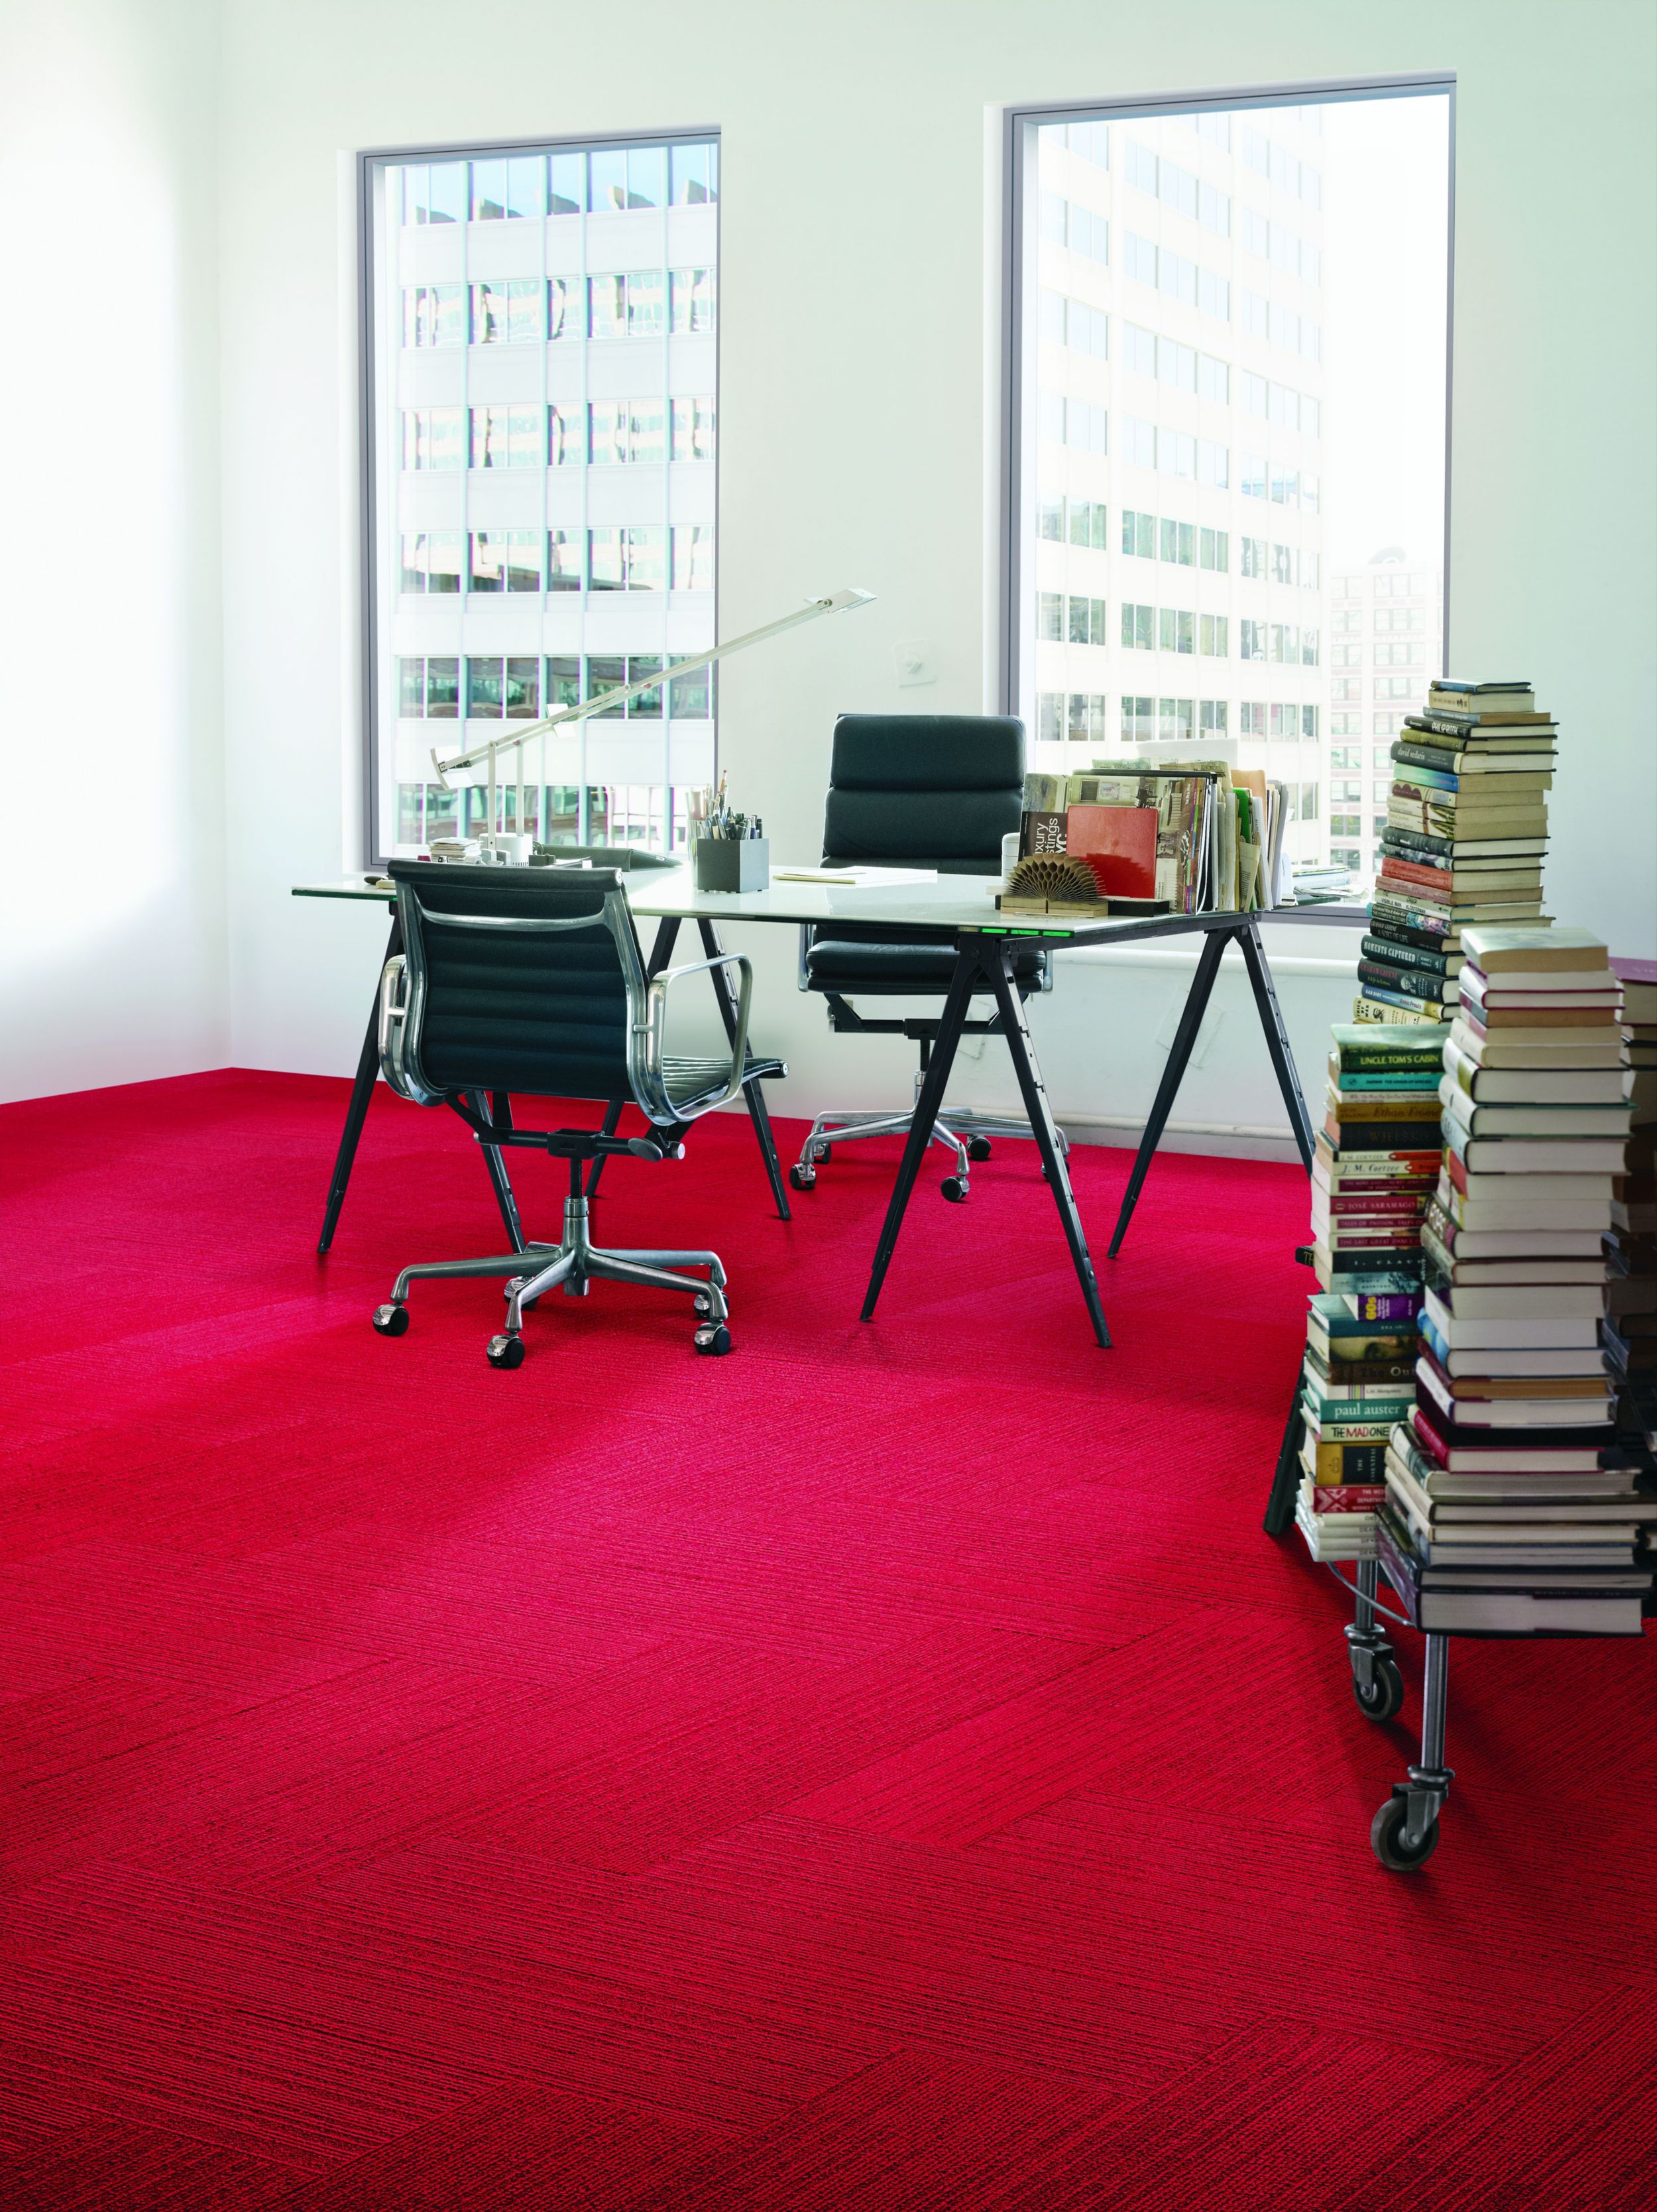 Interface On Line plank carpet tile in space with desk and stacks of books against wall número de imagen 5